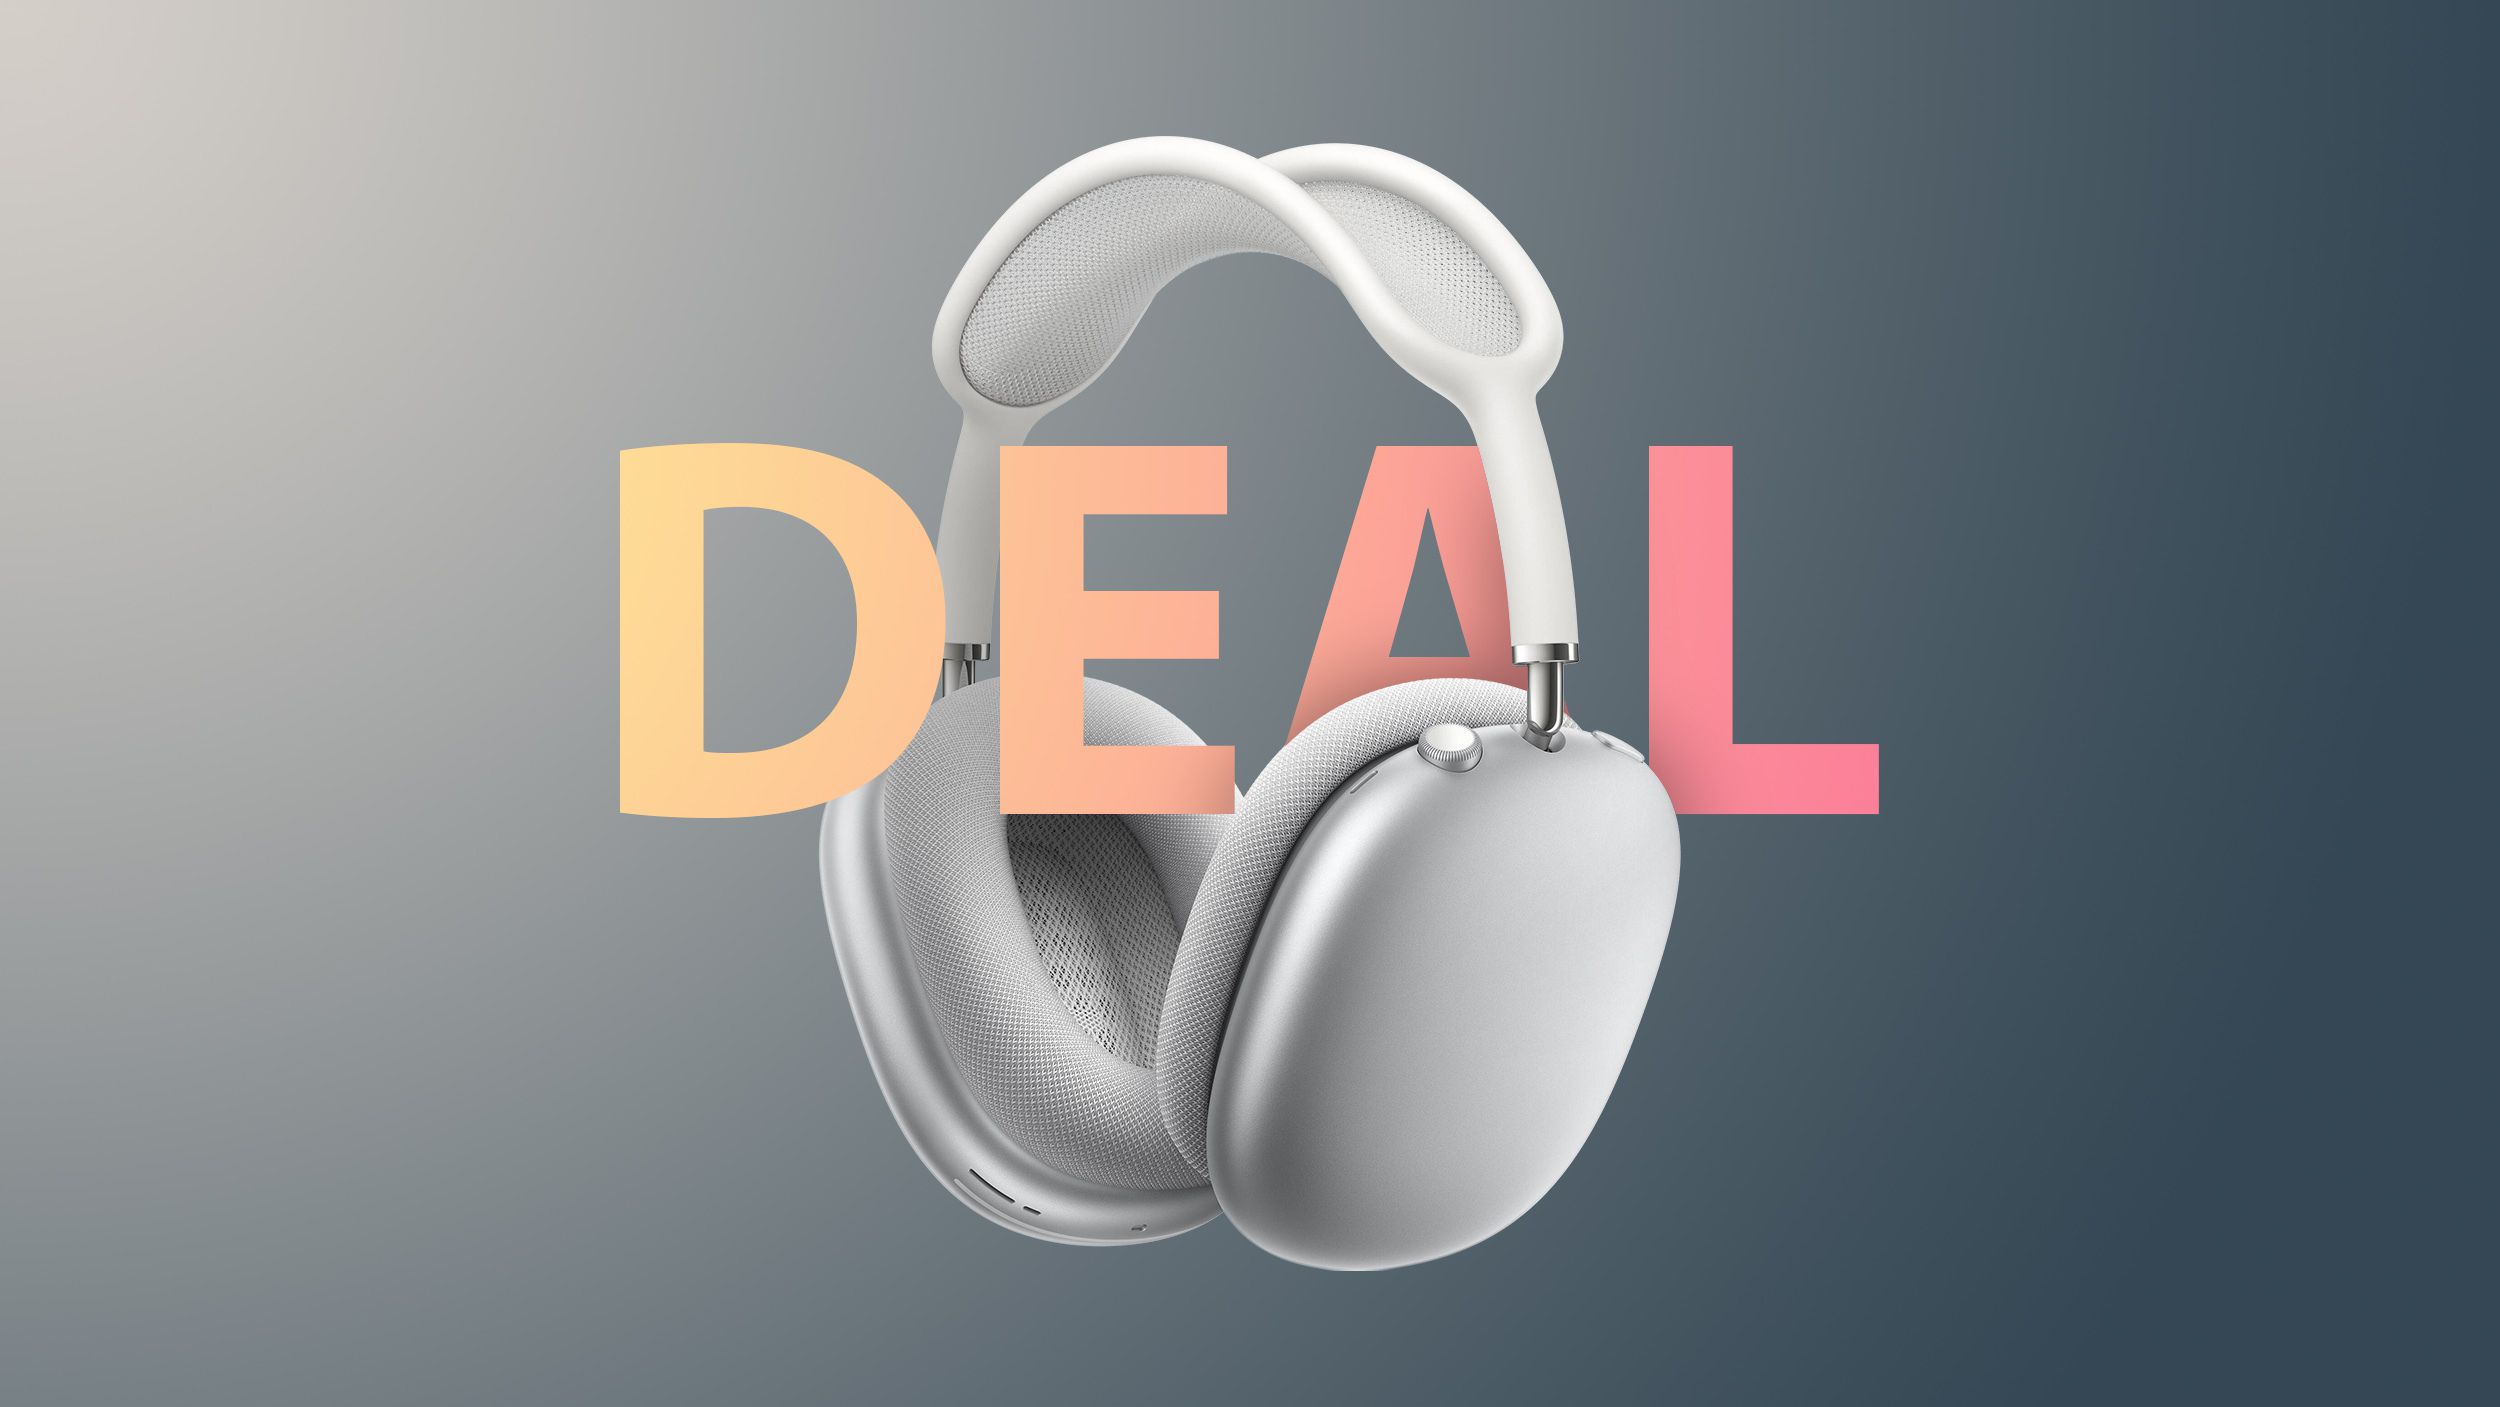 Apple's excellent AirPods Max are $80 off at Woot right now - The